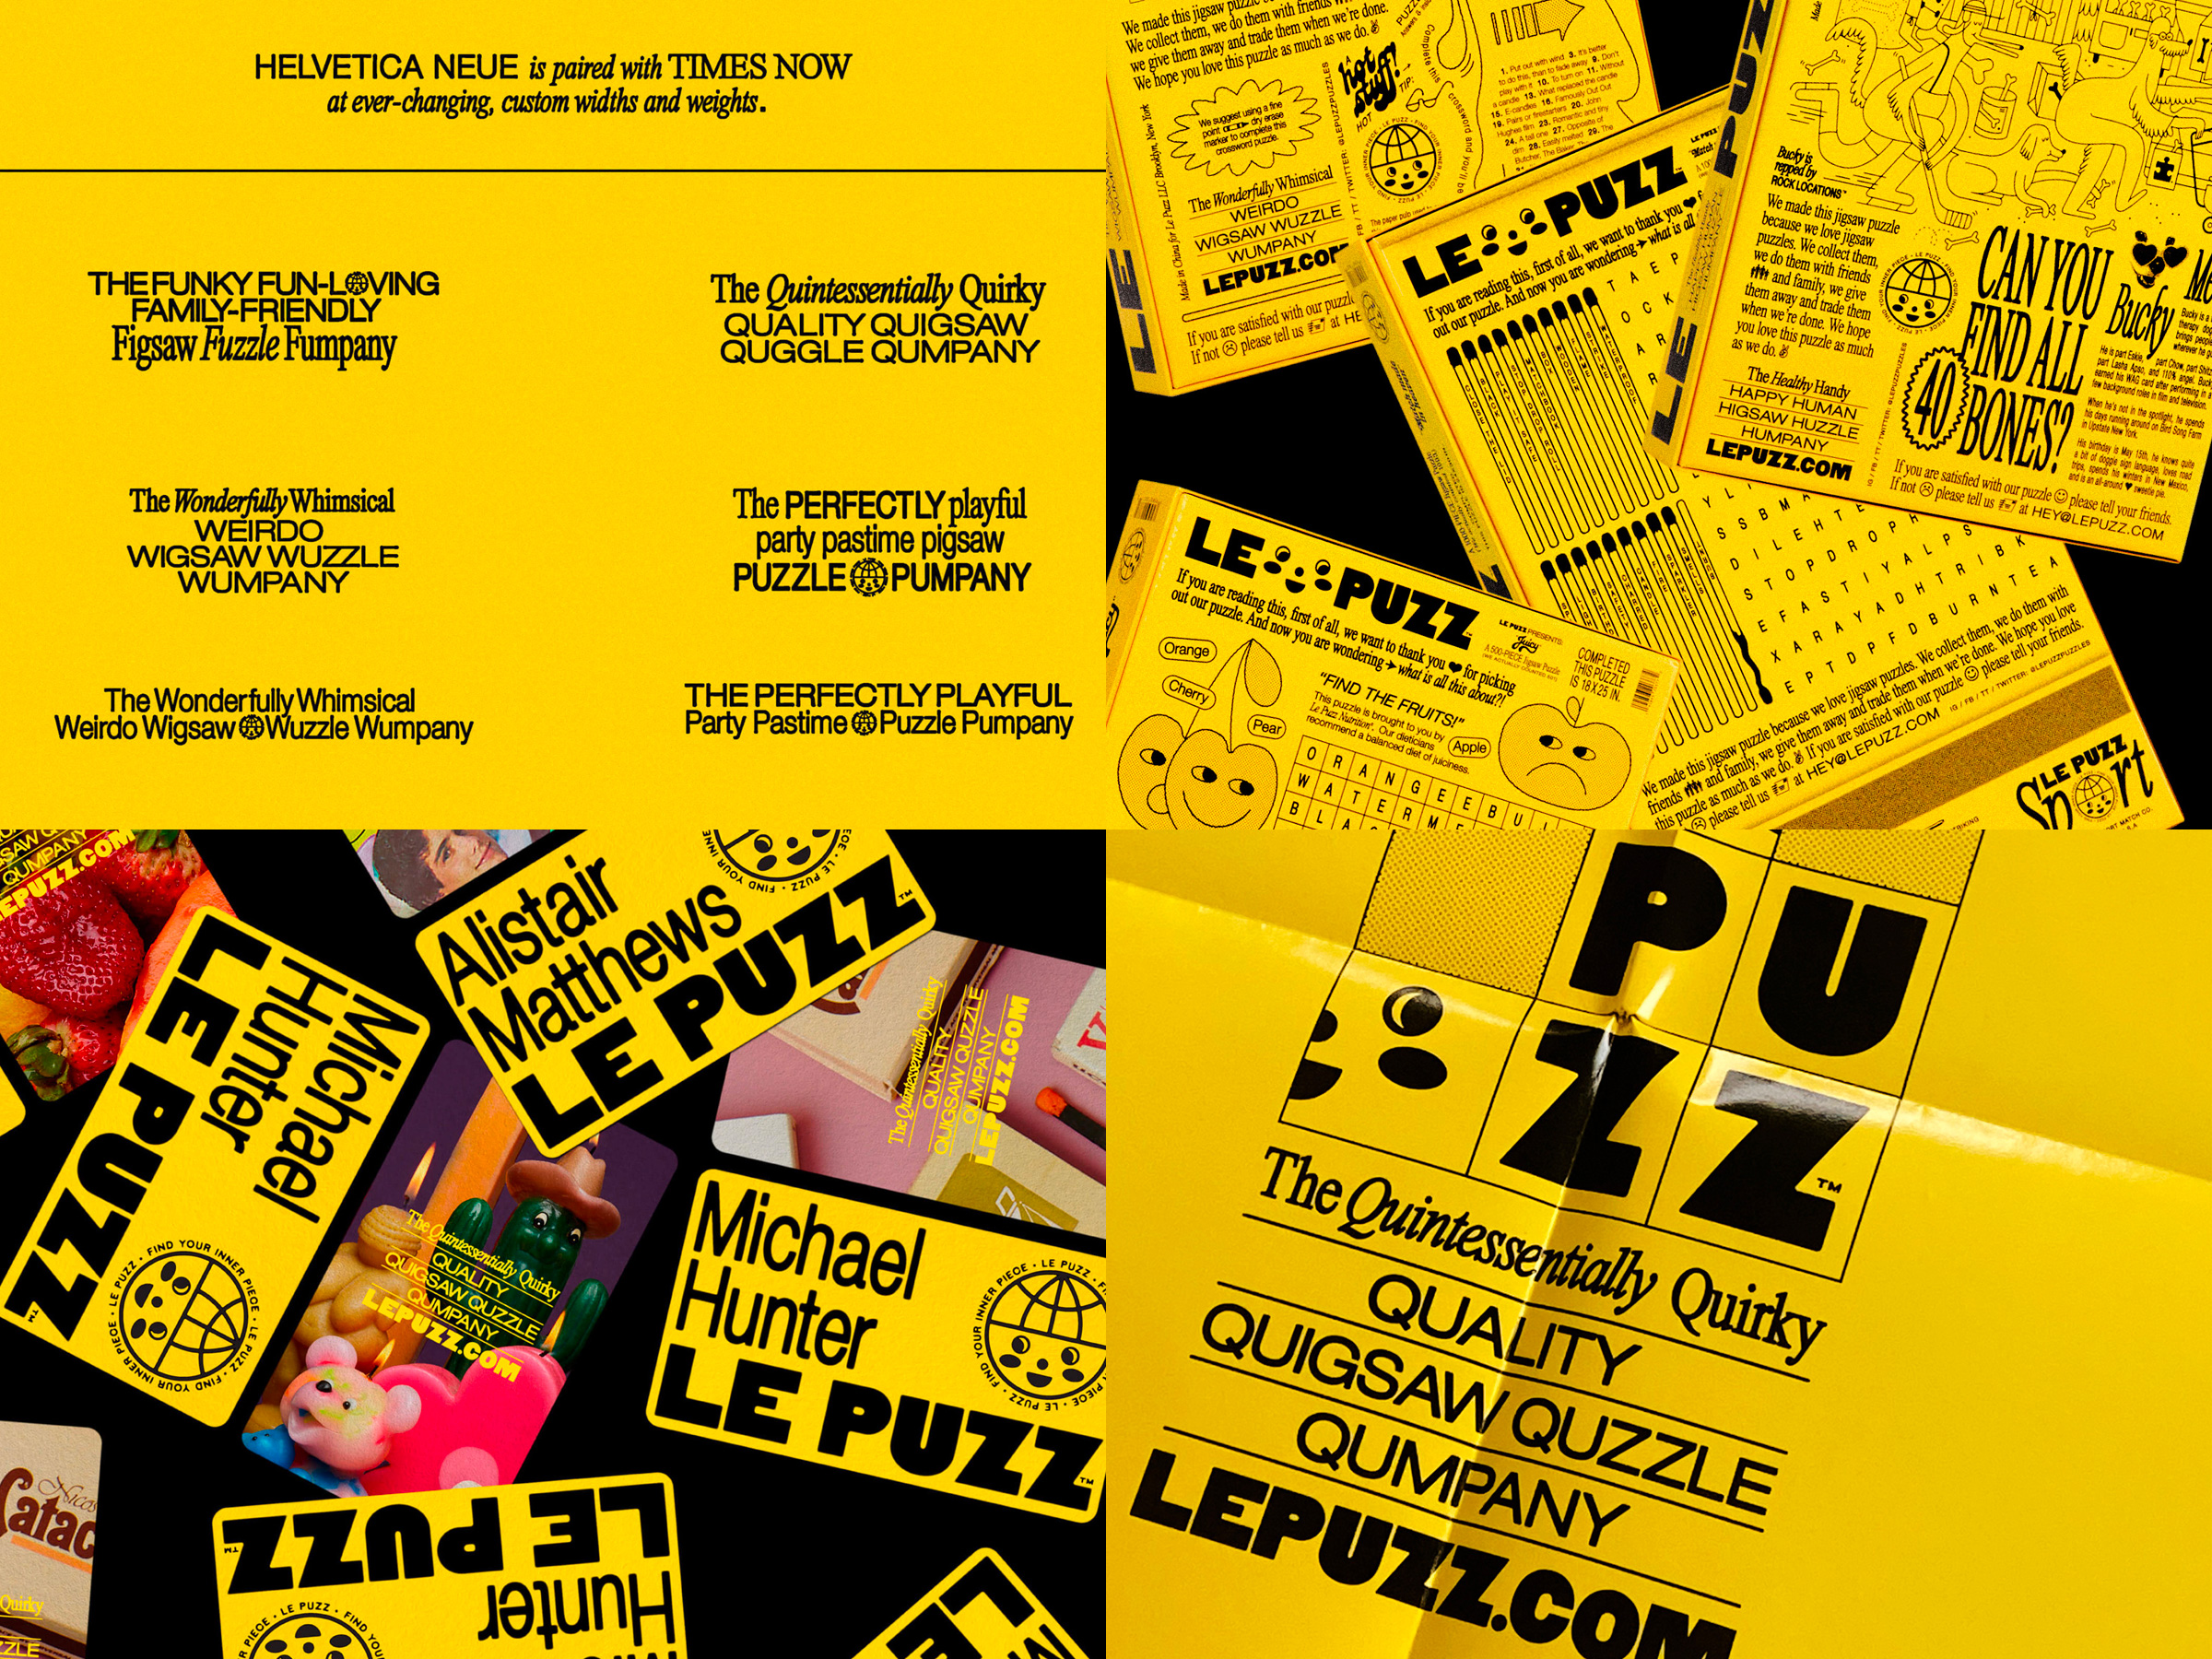 Helvetica Neue and Times Now for Le Puzz by Little Troop